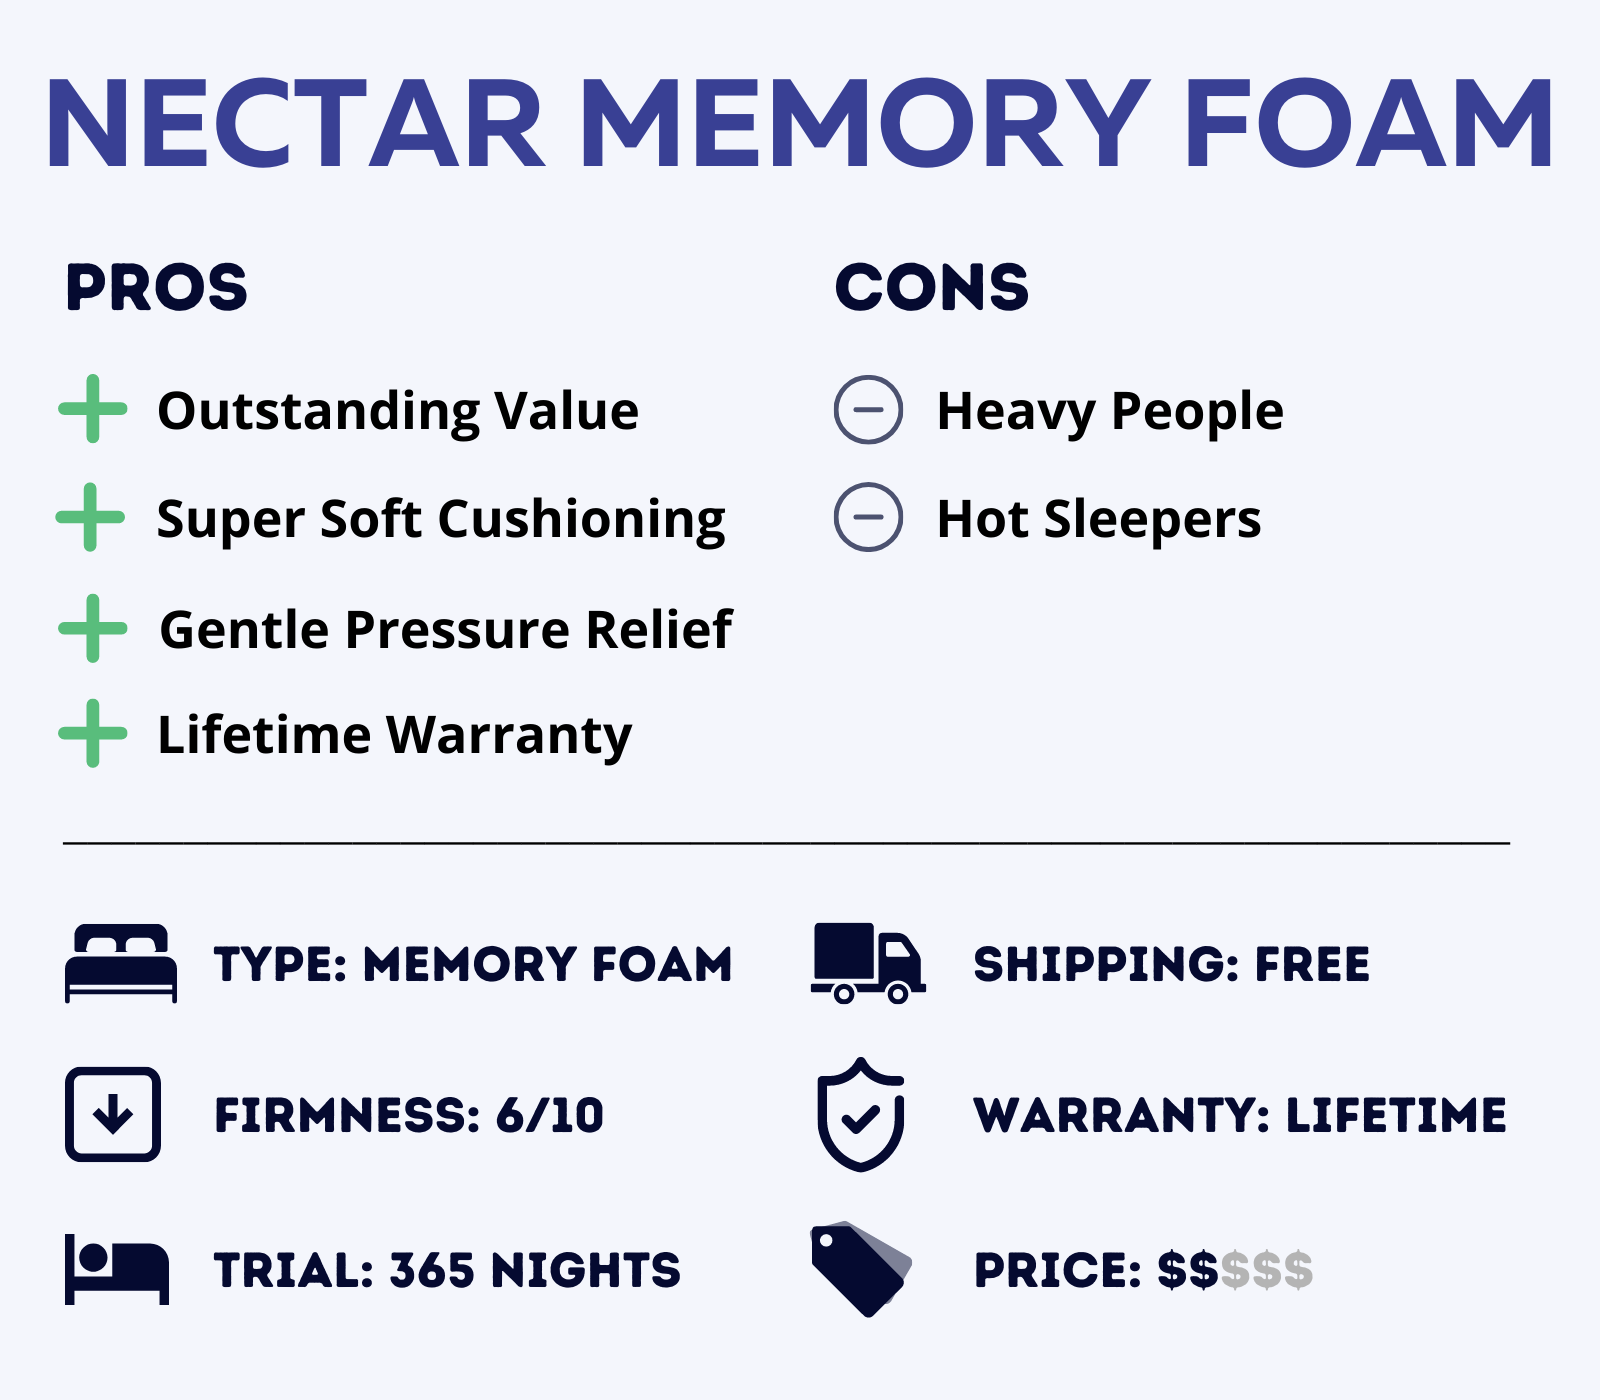 Nectar Memory Foam Mattress Features and Overview